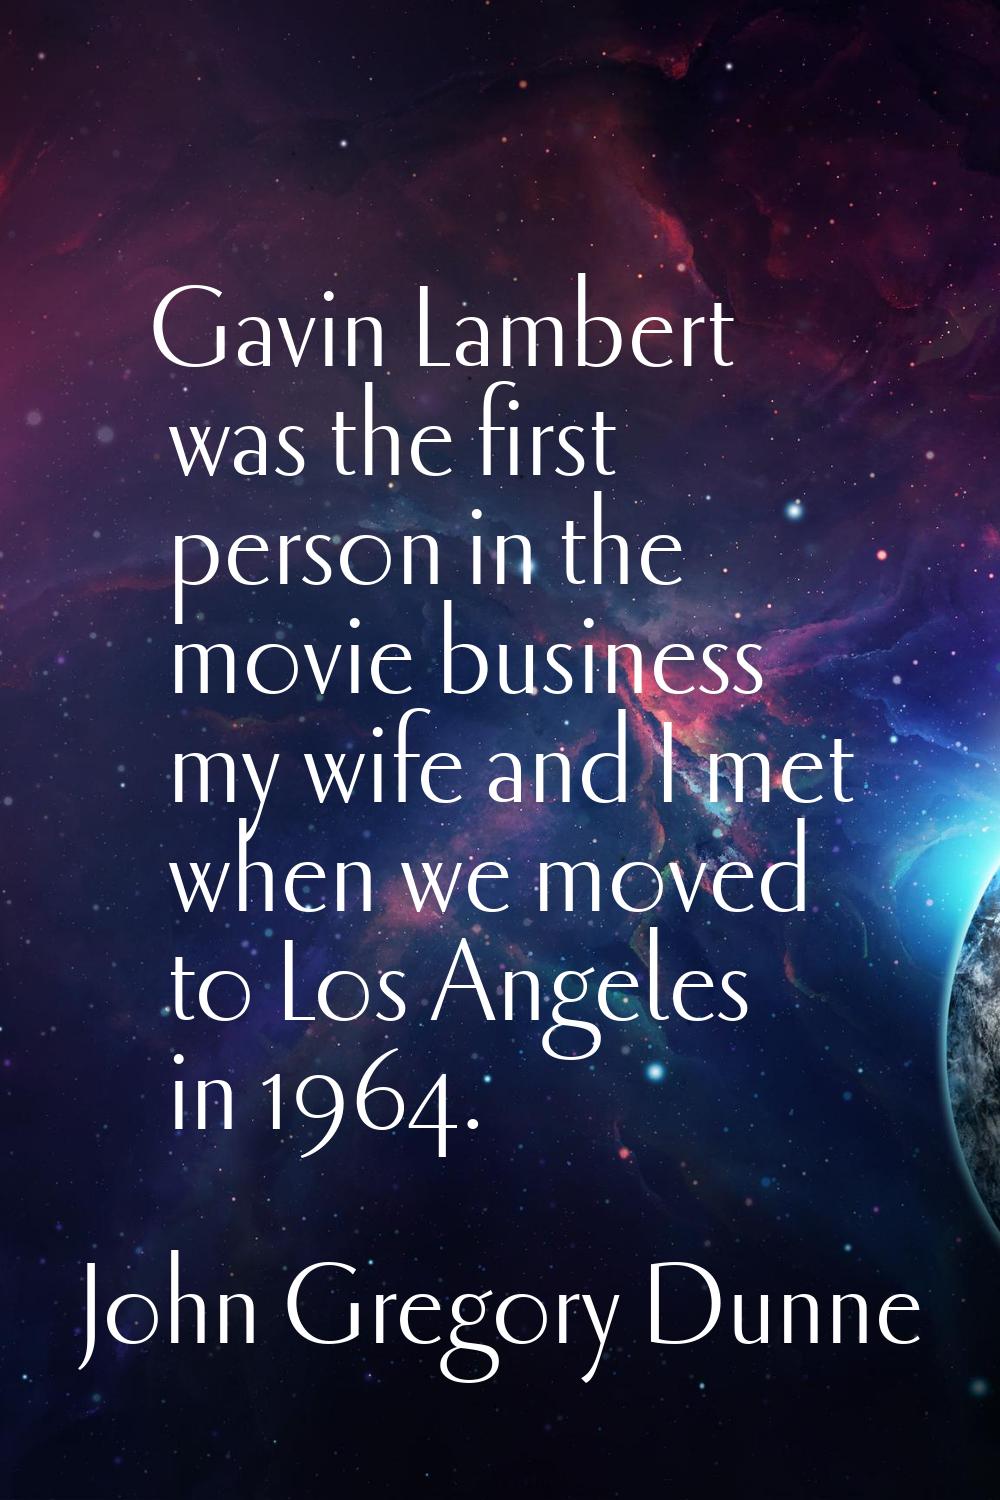 Gavin Lambert was the first person in the movie business my wife and I met when we moved to Los Ang